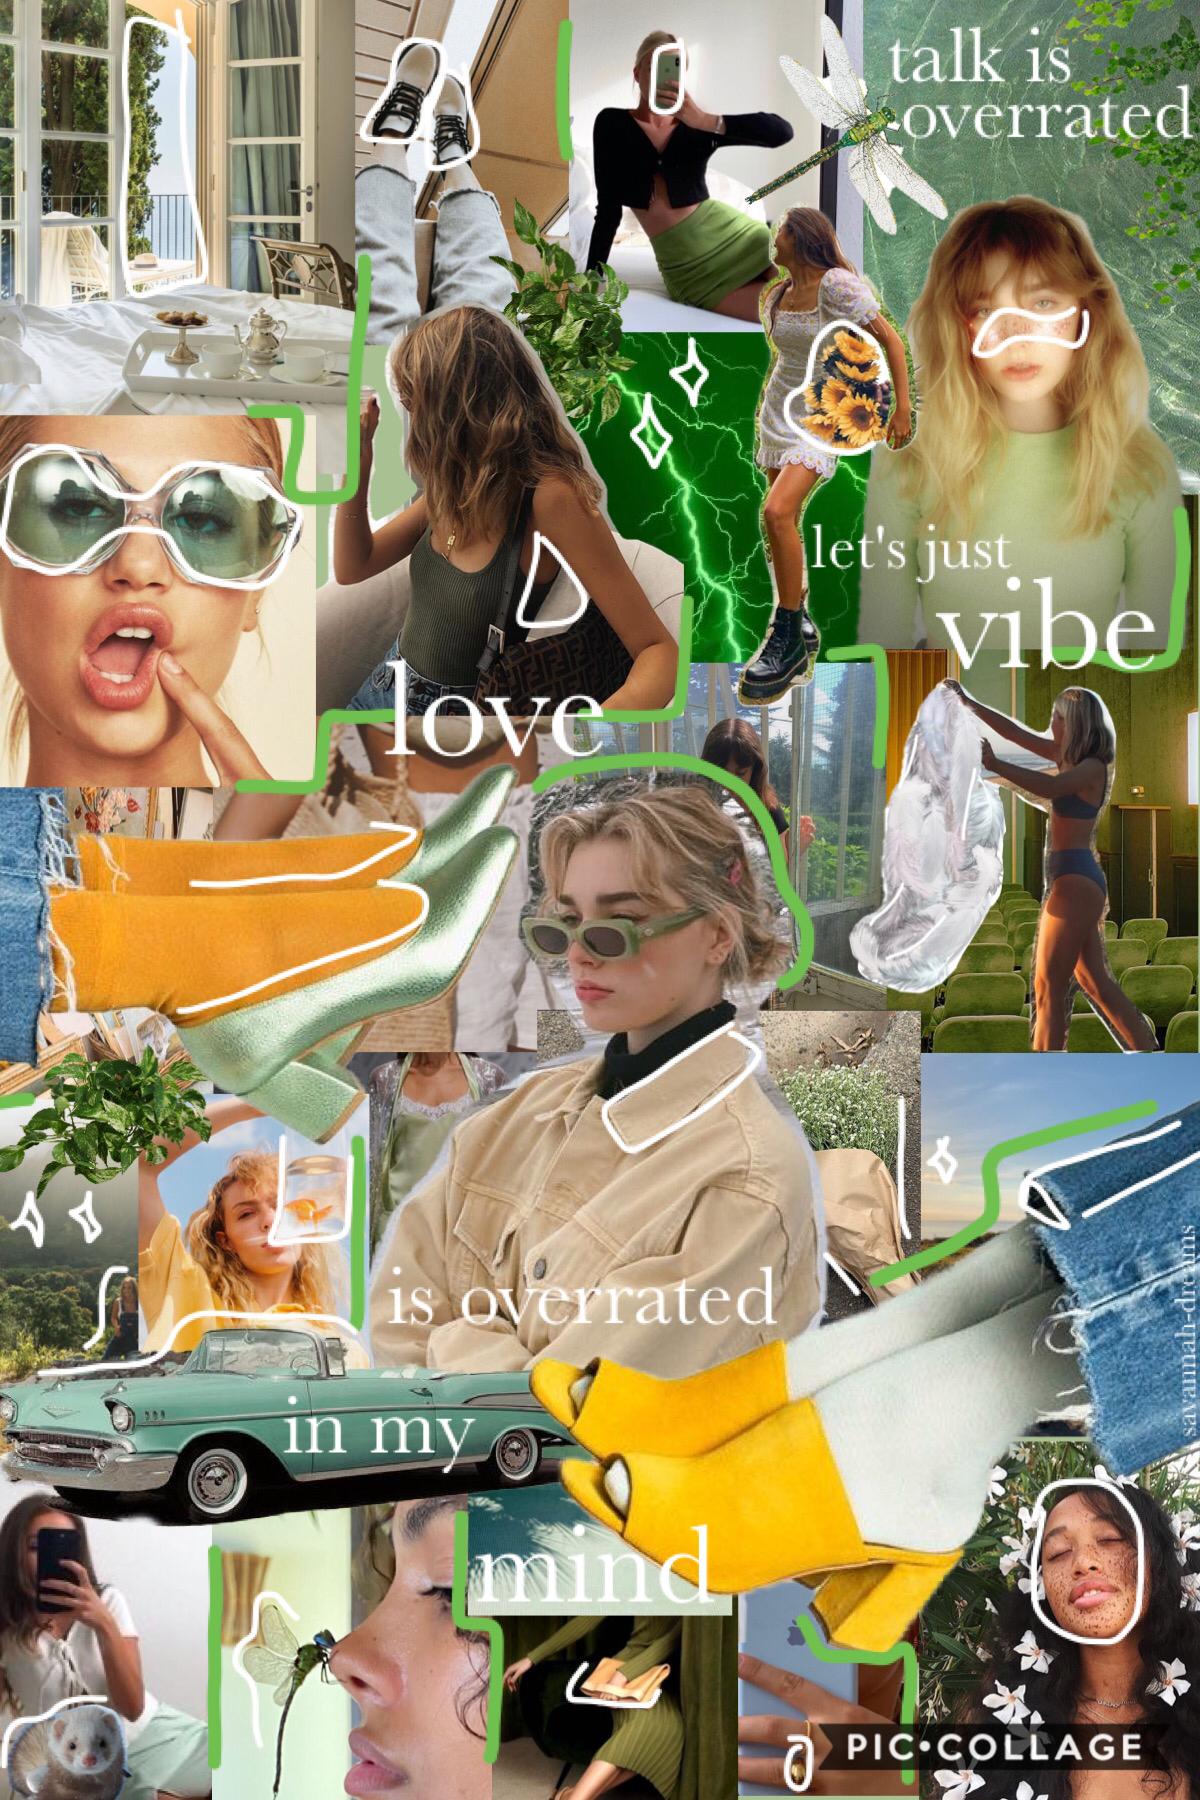 heyyyooo 👋🏼 finally a collage i'm excited to post!!!!!!!!! currently journaling 🌿🧚🏼‍♀️ lyrics from 'talk is overrated' by jeremy zucker 🥑🦦 so rainy and only abt 12 degrees C over here 🌧 gonna try to do quality over quality for future collages ✌🏼check remi